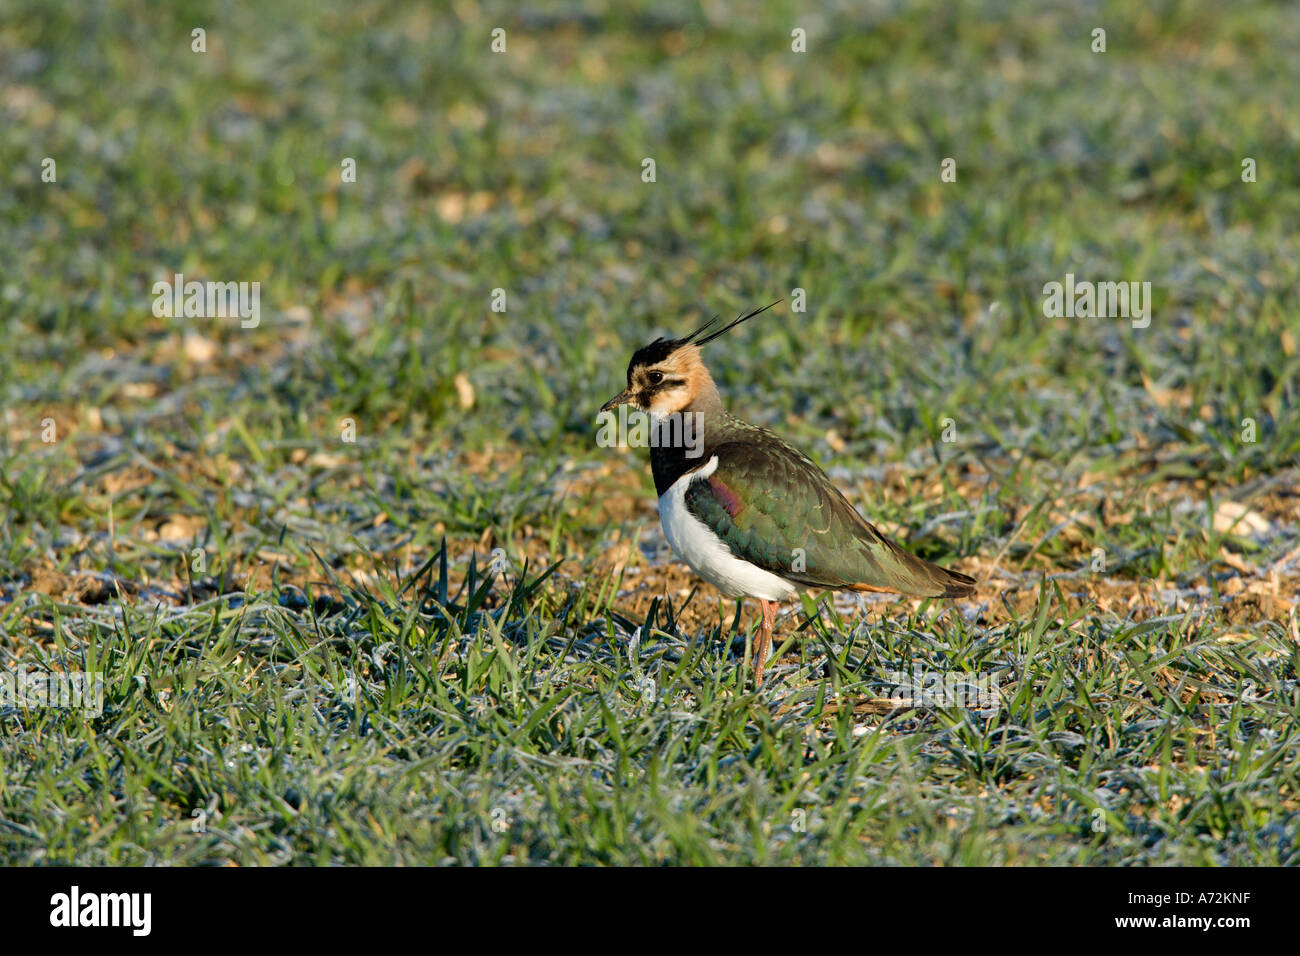 Lapwing Vanellus vanellus stood looking alert on rough grass therfield hertfordshire Stock Photo